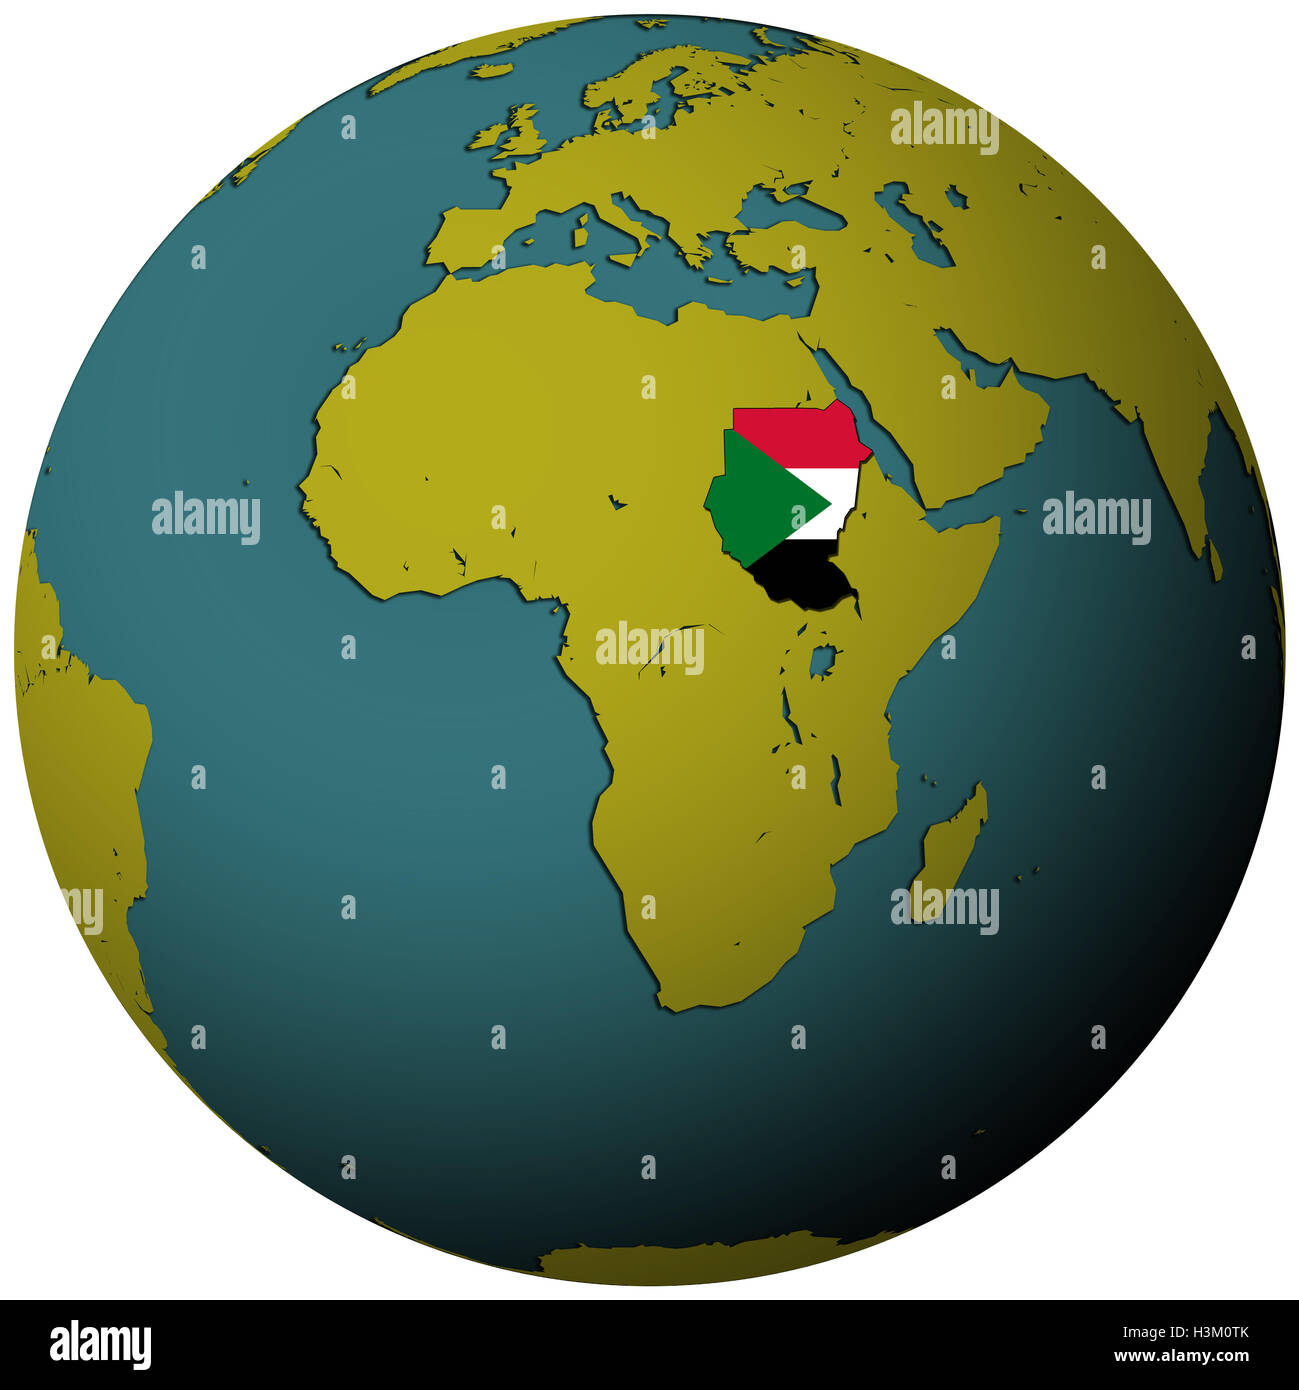 sudan territory with flag on map of globe Stock Photo